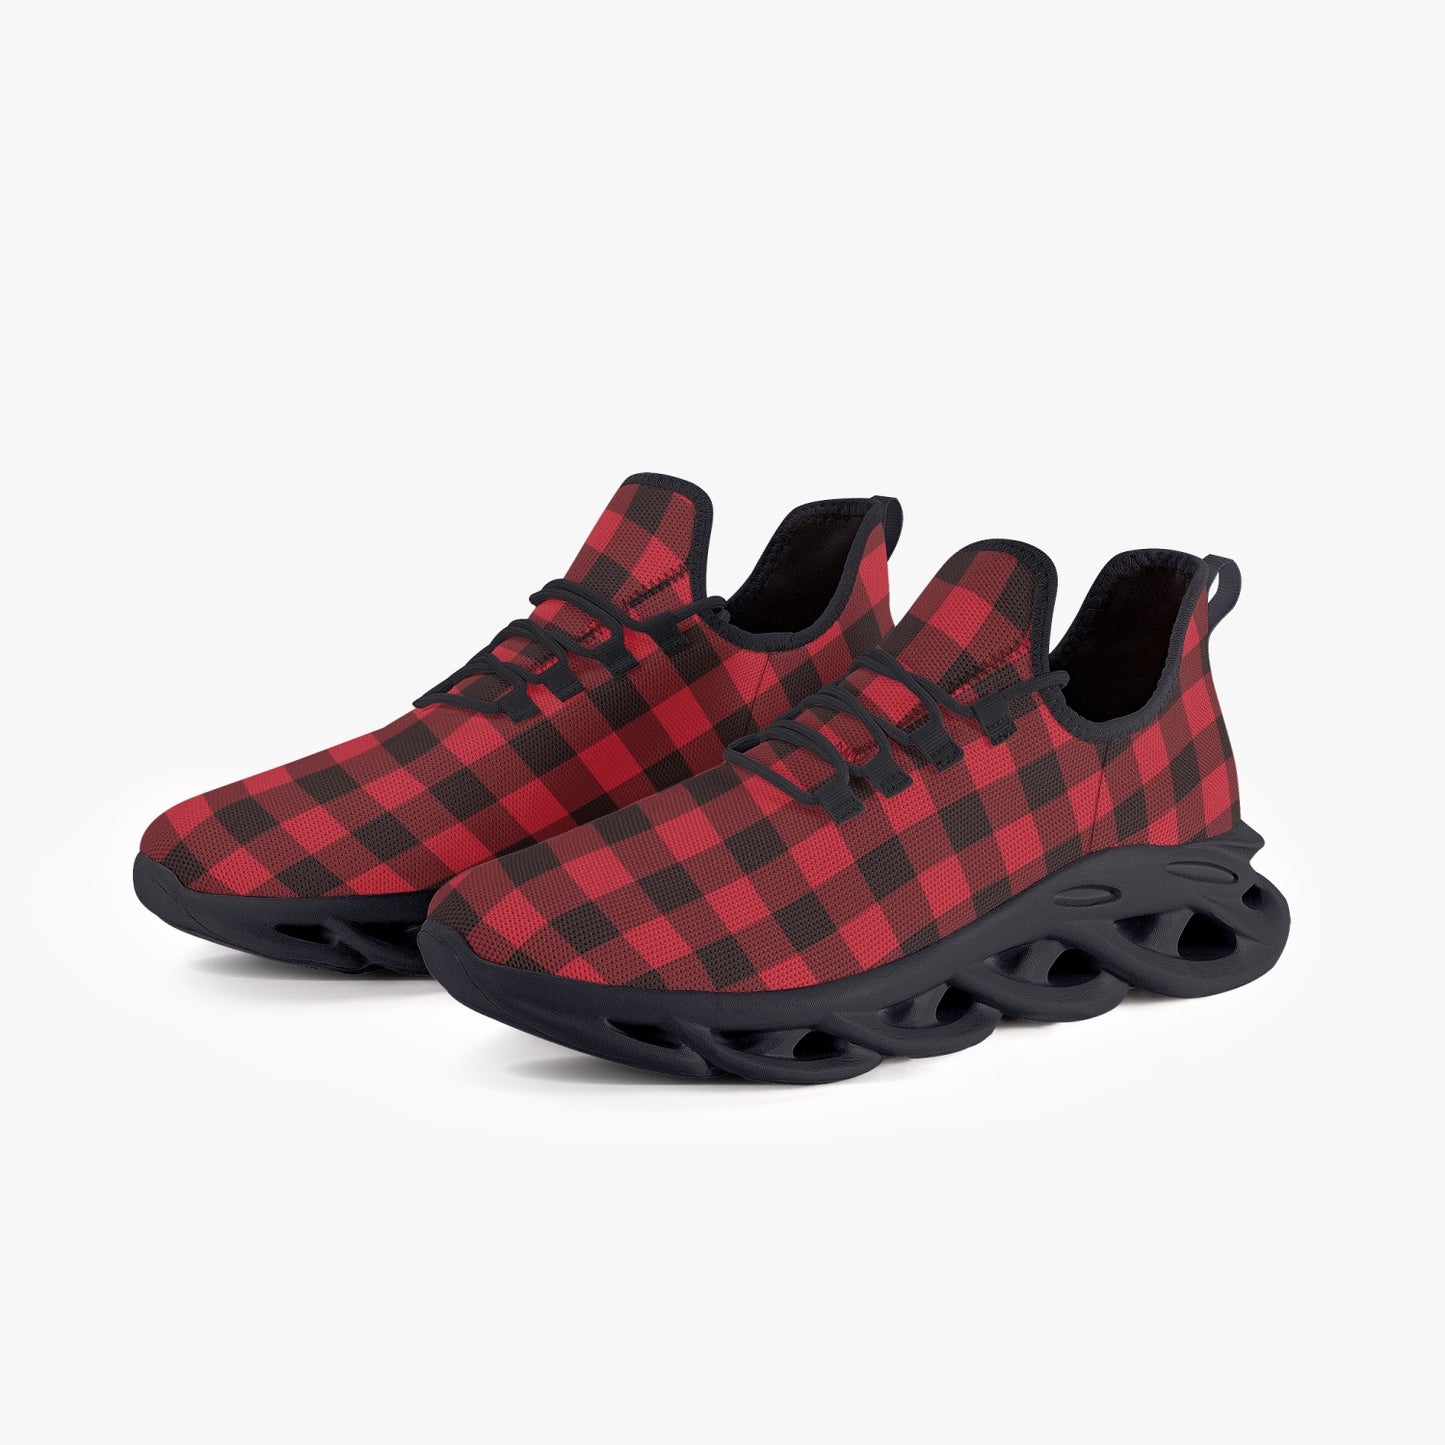 Red Black Buffalo Plaid Men Sneakers, Check Bouncing Mesh Knit Running Athletic Sport Gym Workout Breathable Lace Up Fitness Shoes Trainers Starcove Fashion